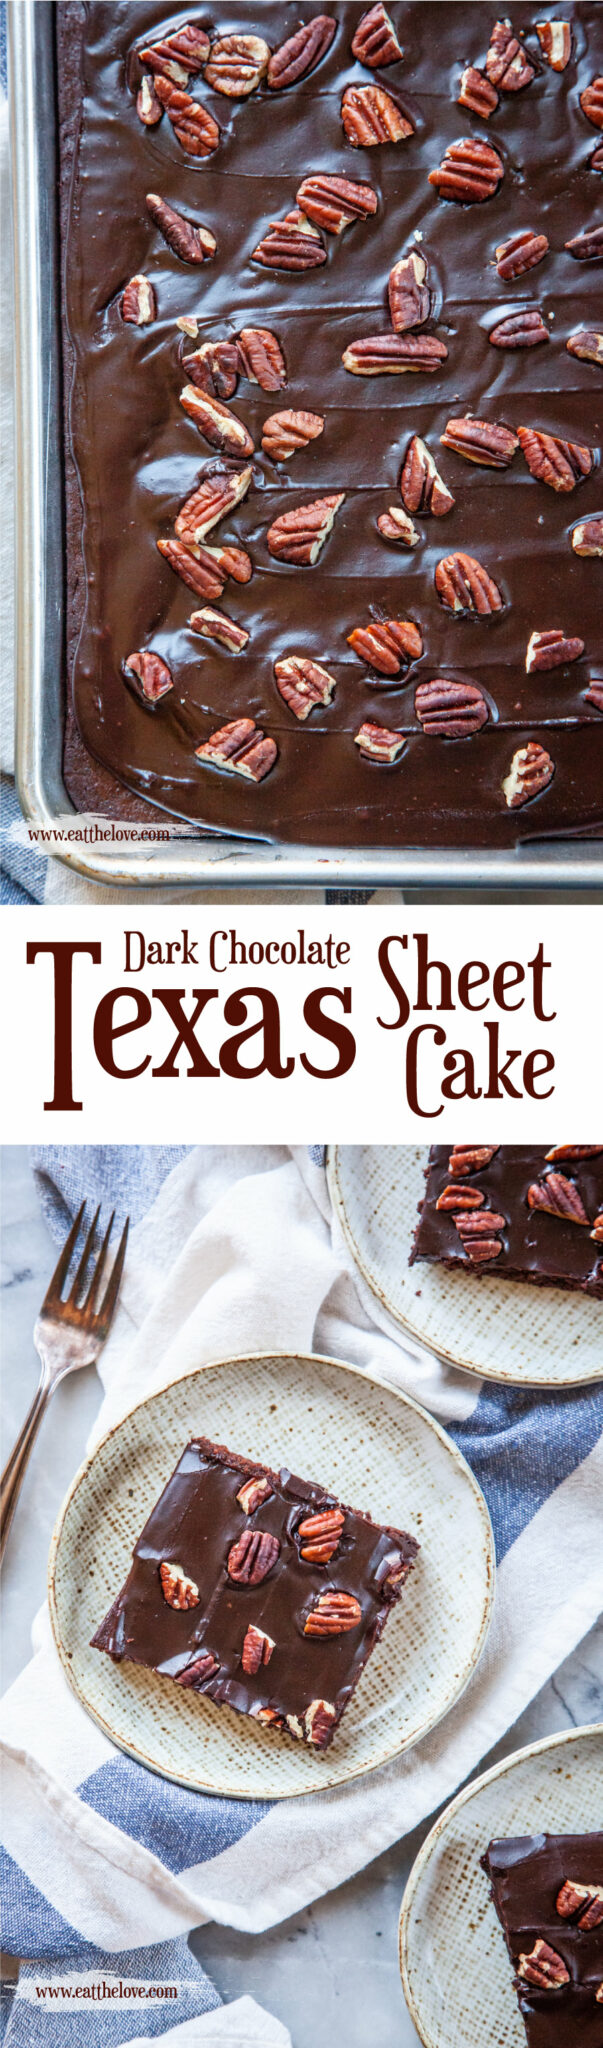 Top image is a Texas Sheet Cake in the sheet pan. Right image is a slice of Texas Sheet Cake on a plate, with two more slices of cake next to it, cropped slightly out of the photo.